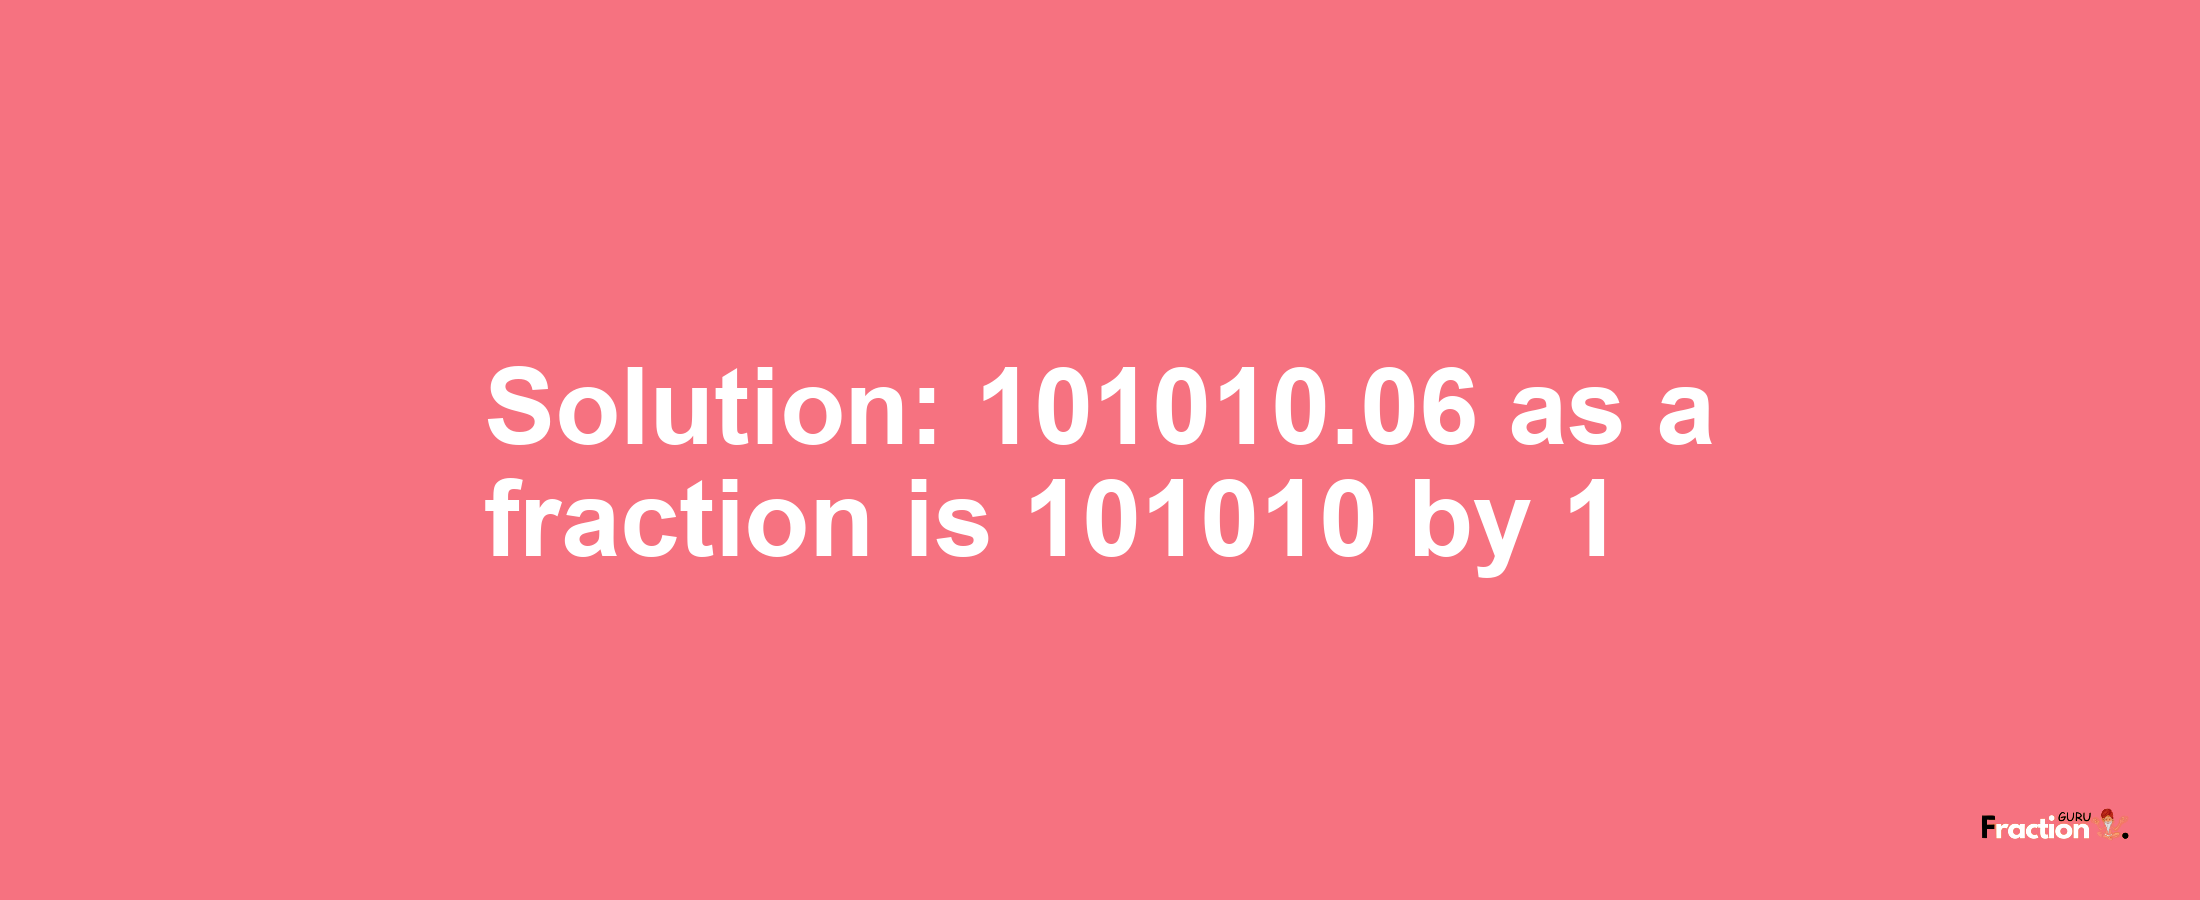 Solution:101010.06 as a fraction is 101010/1